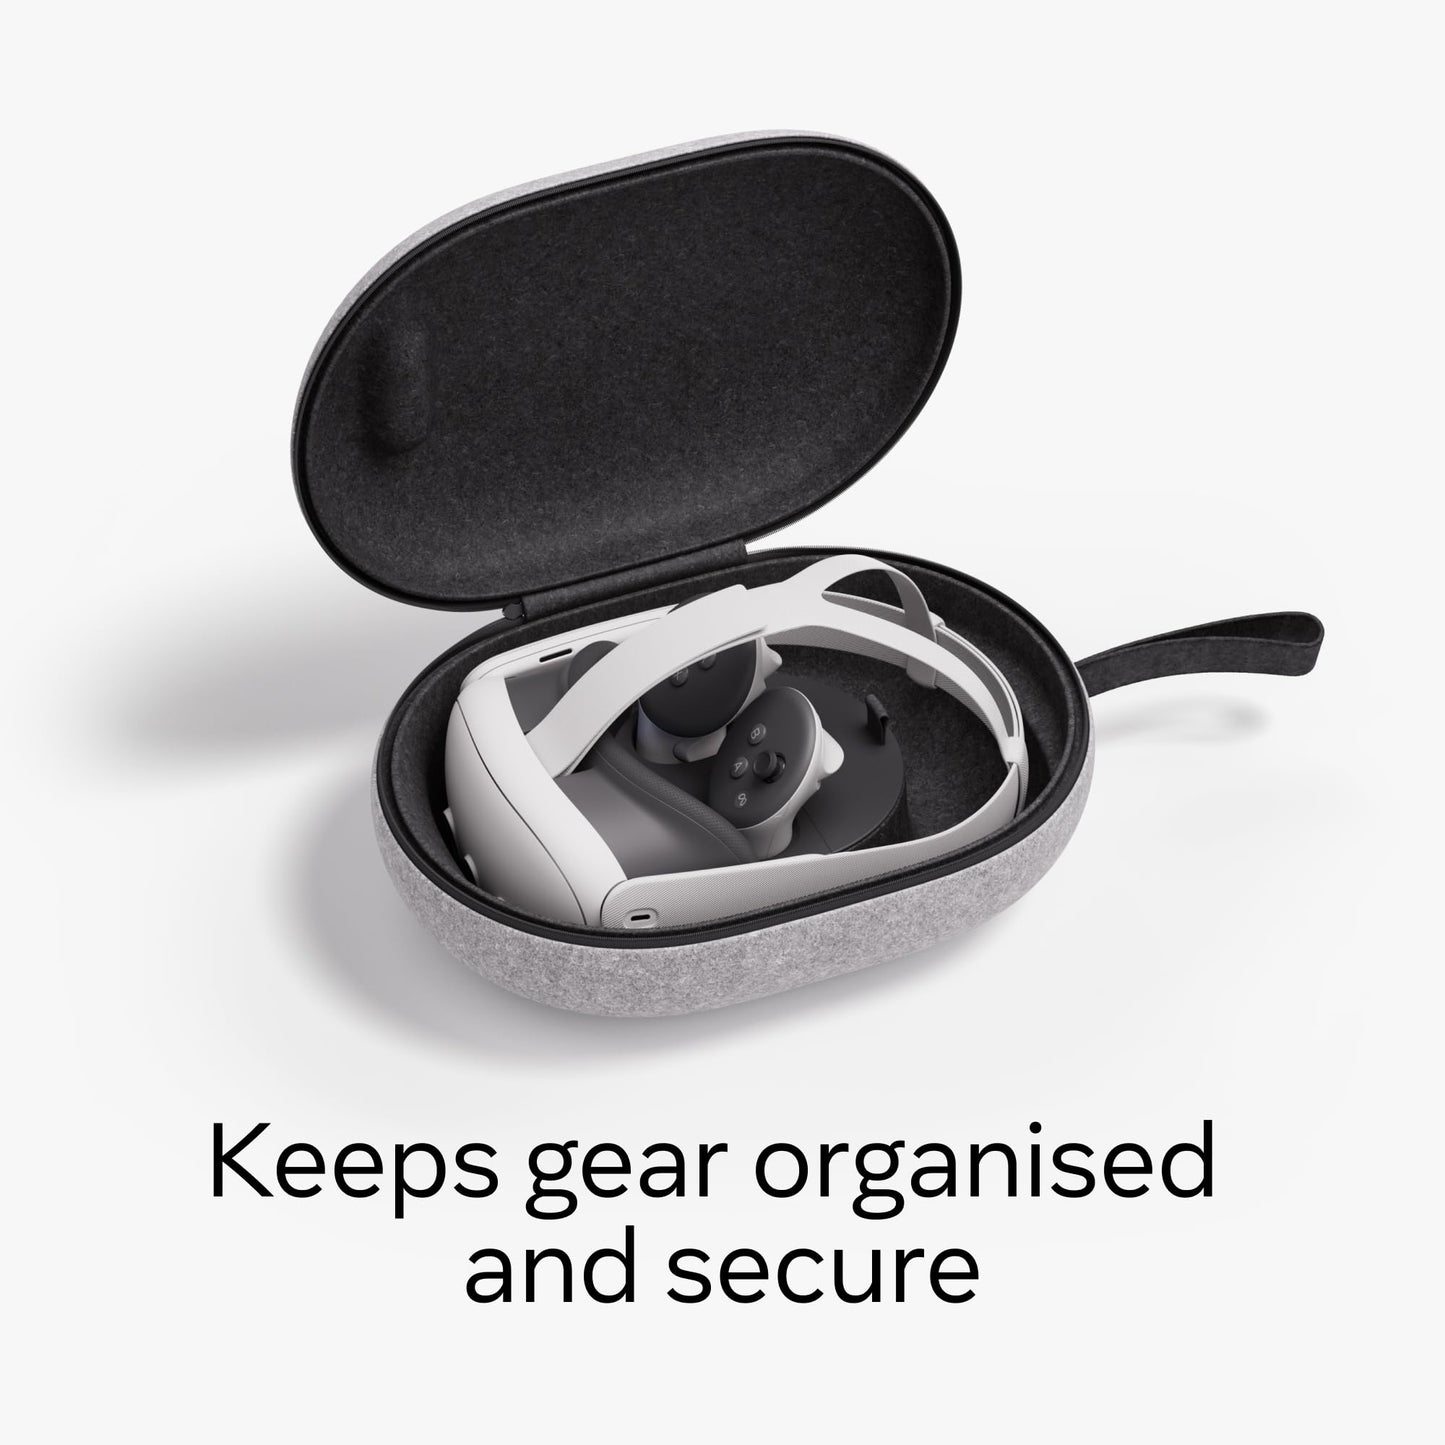 Organise and secure